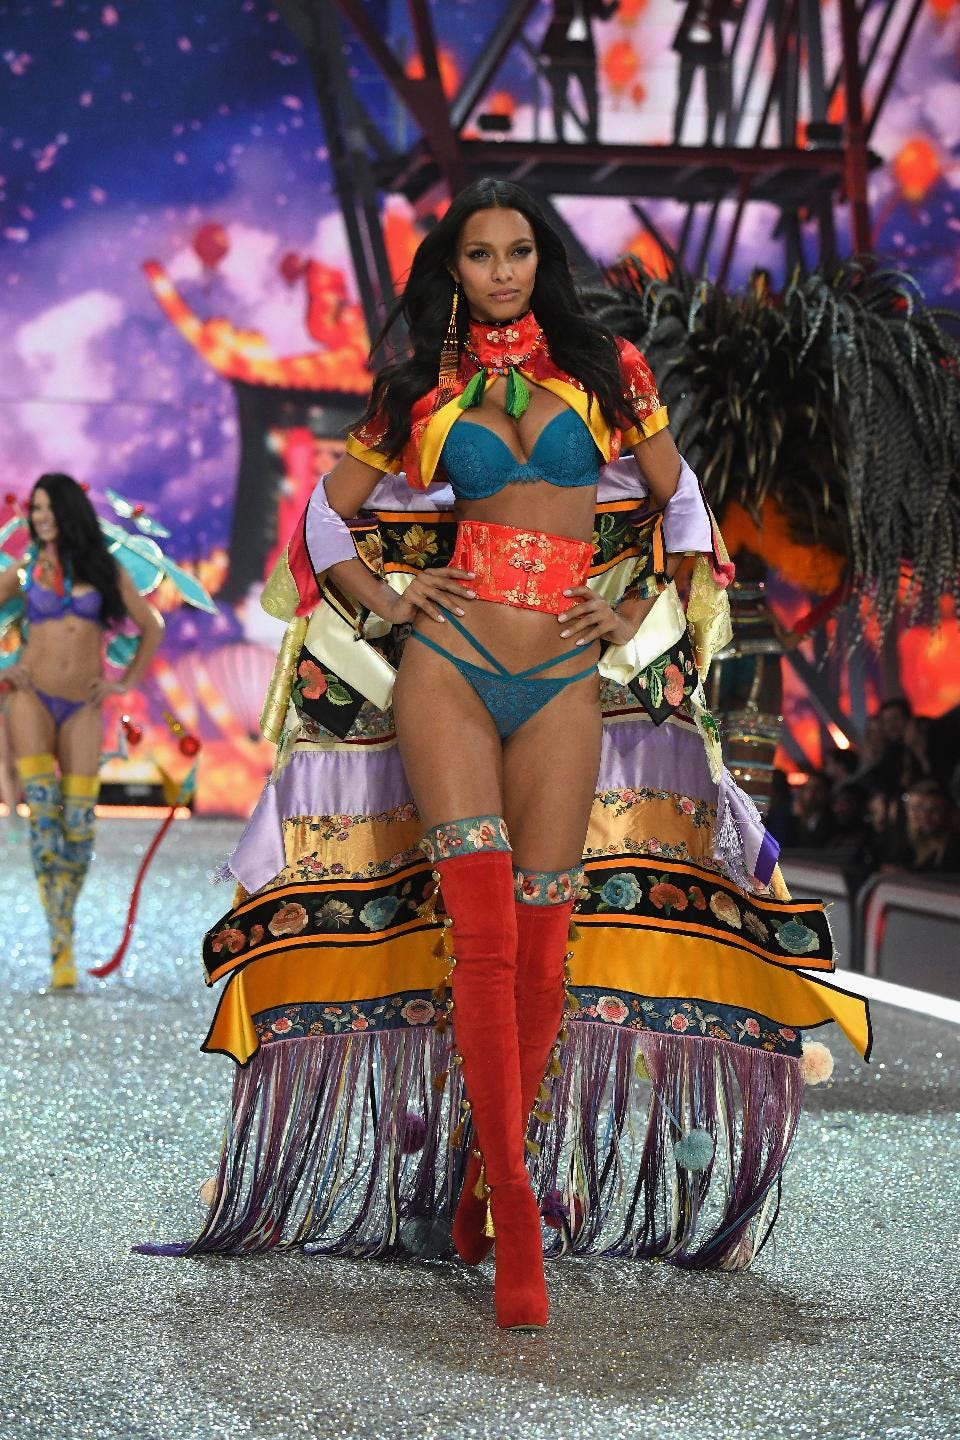 An Open Letter To The 2016 Victoria's Secret Fashion Show